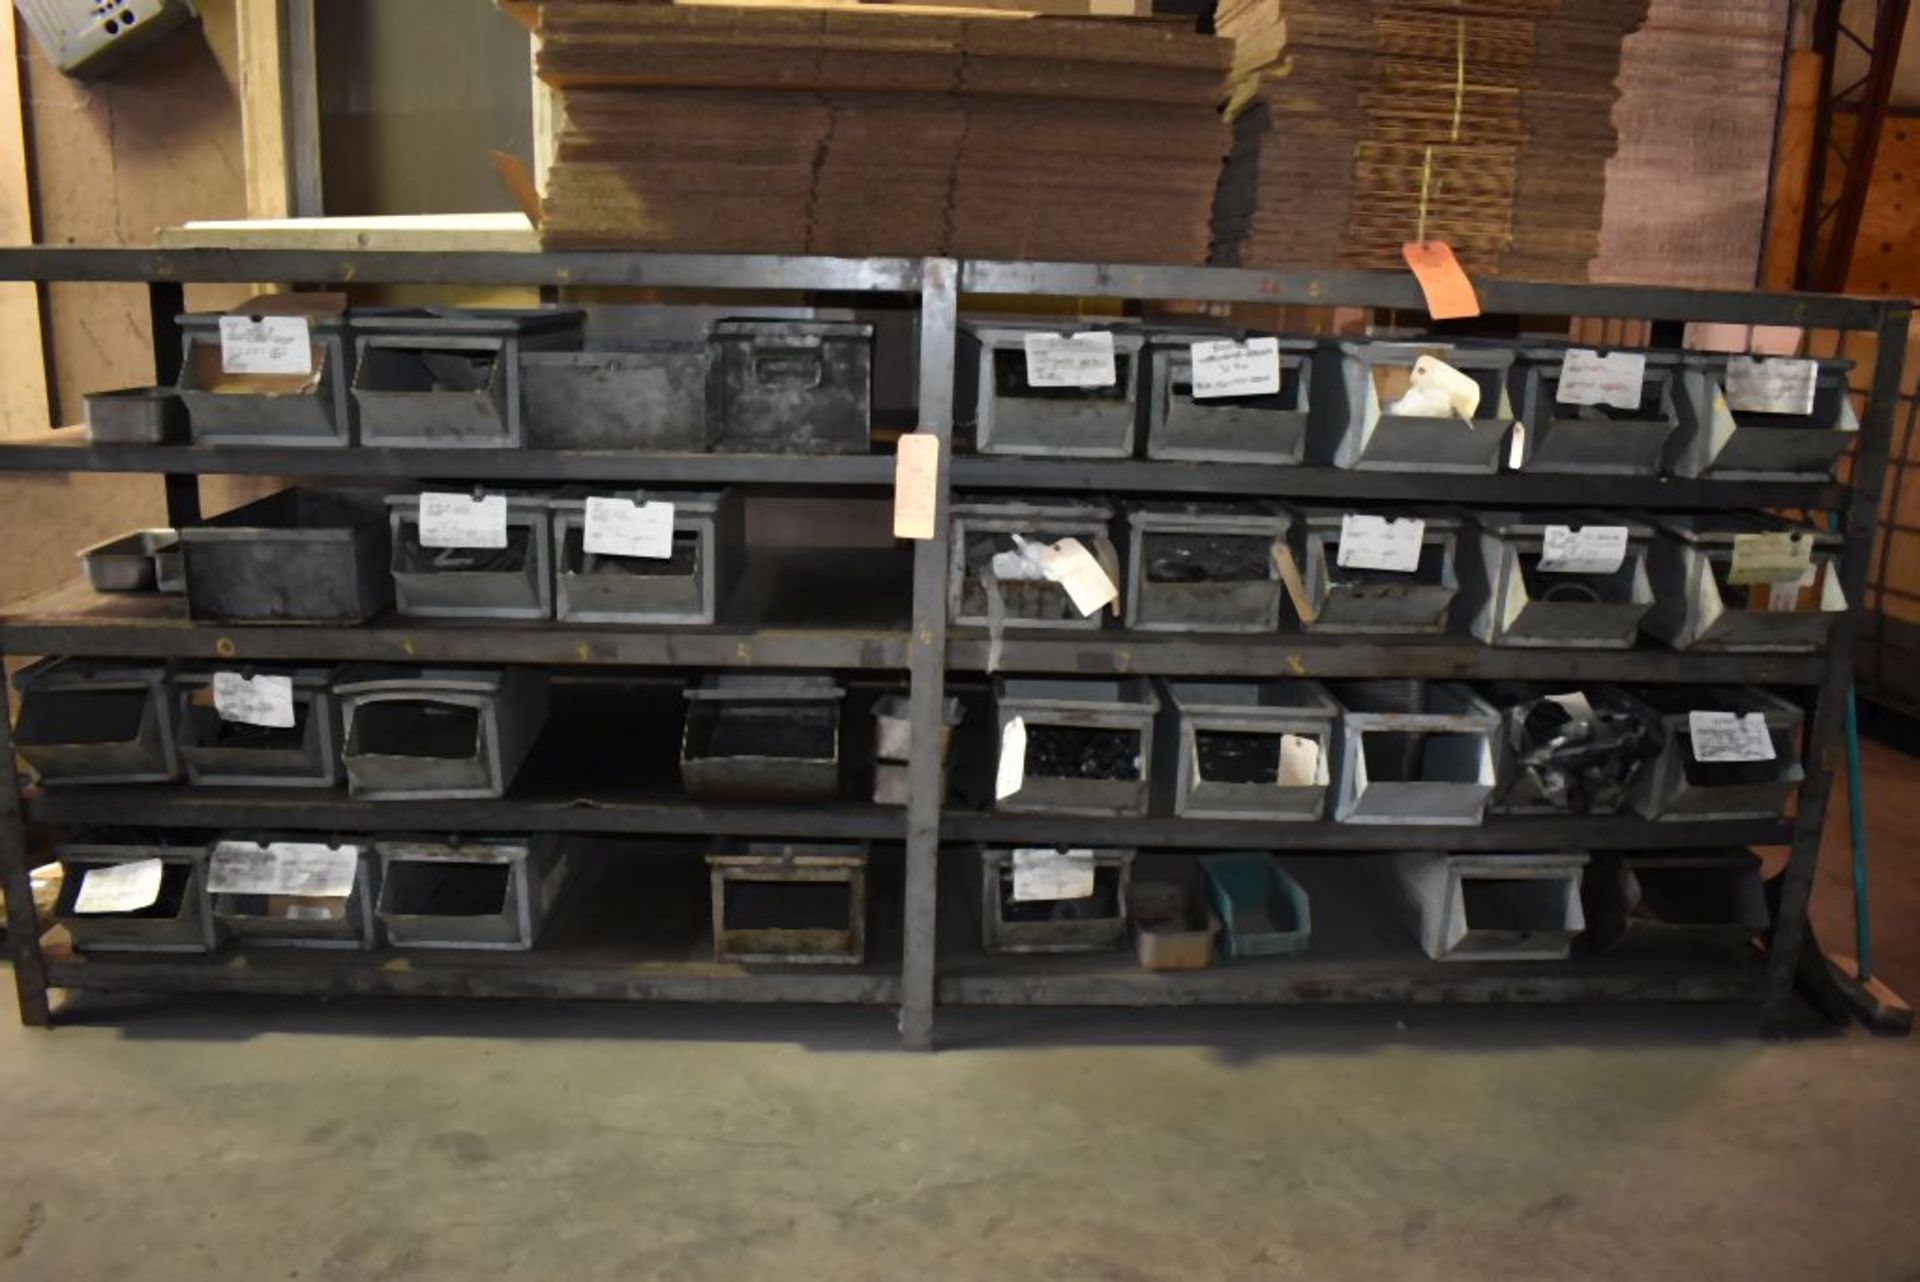 FIVE TIER HEAVY DUTY WELDED STEEL SHELVING UNIT WITH CONTENTS, BINS OF ASSORTED PIECES, RACK IS 10'L